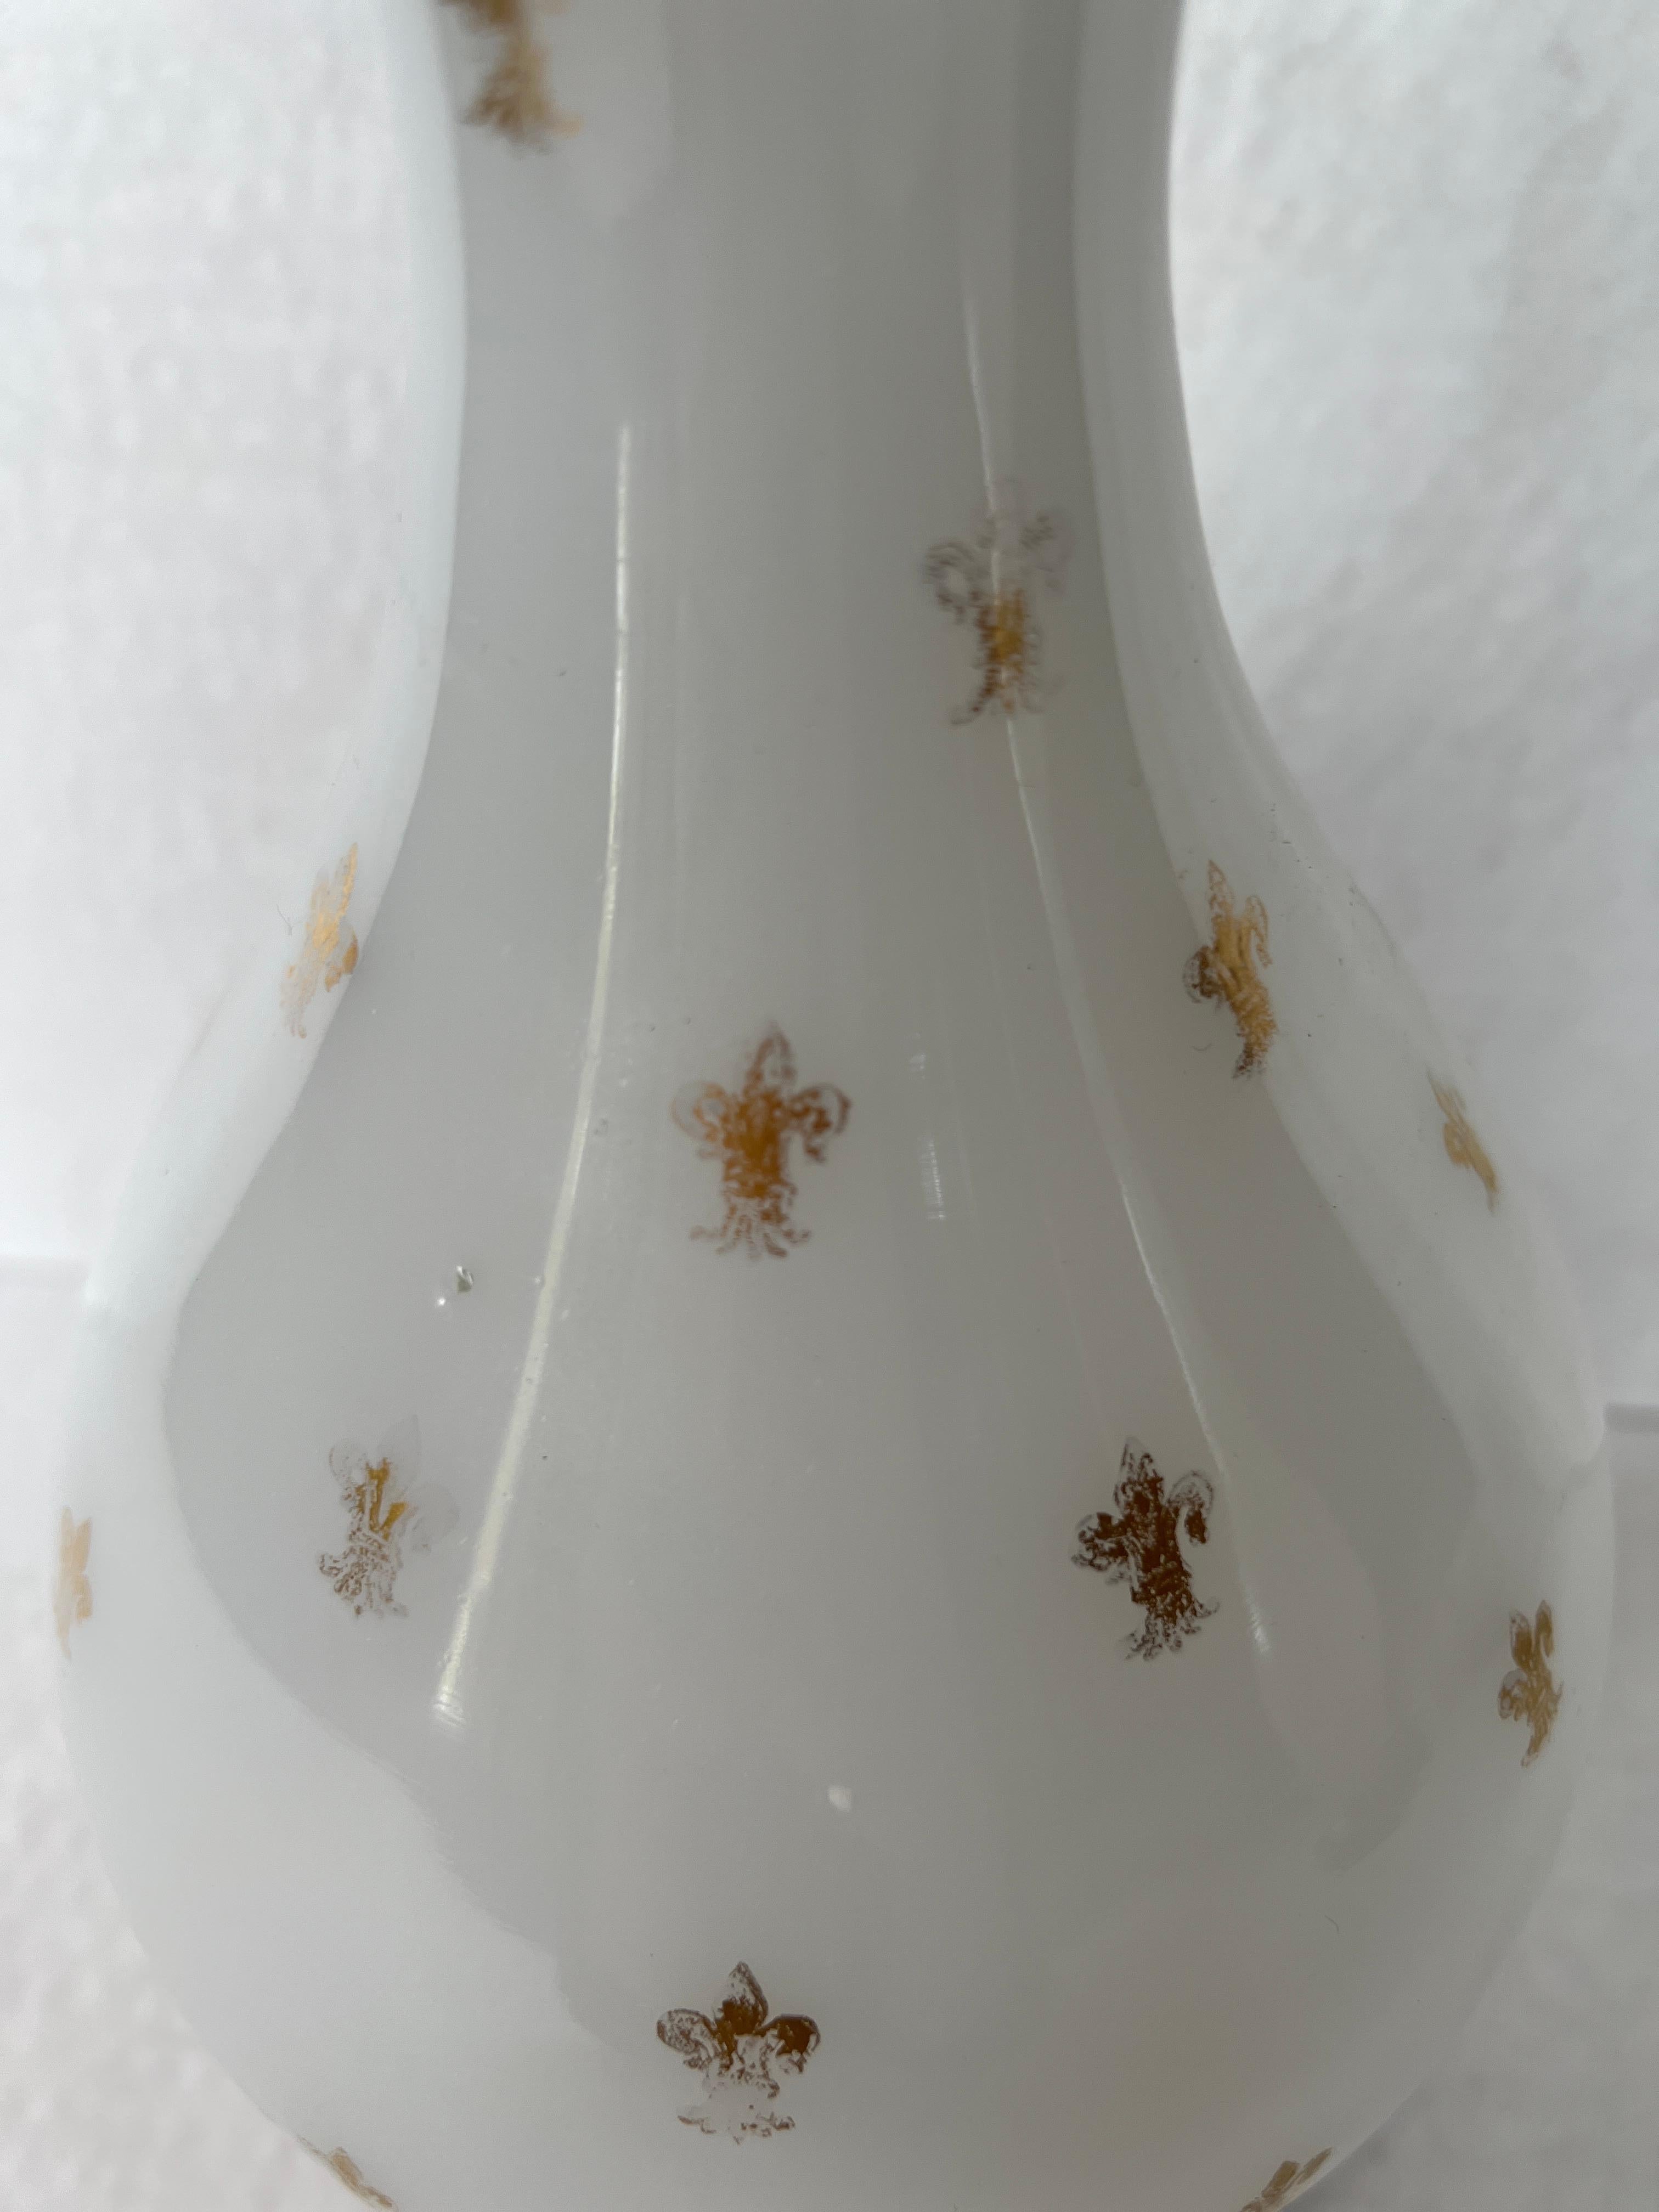 Pair of Opaline Glass Fleur De Lis Table Lamps In Excellent Condition For Sale In Mt Kisco, NY